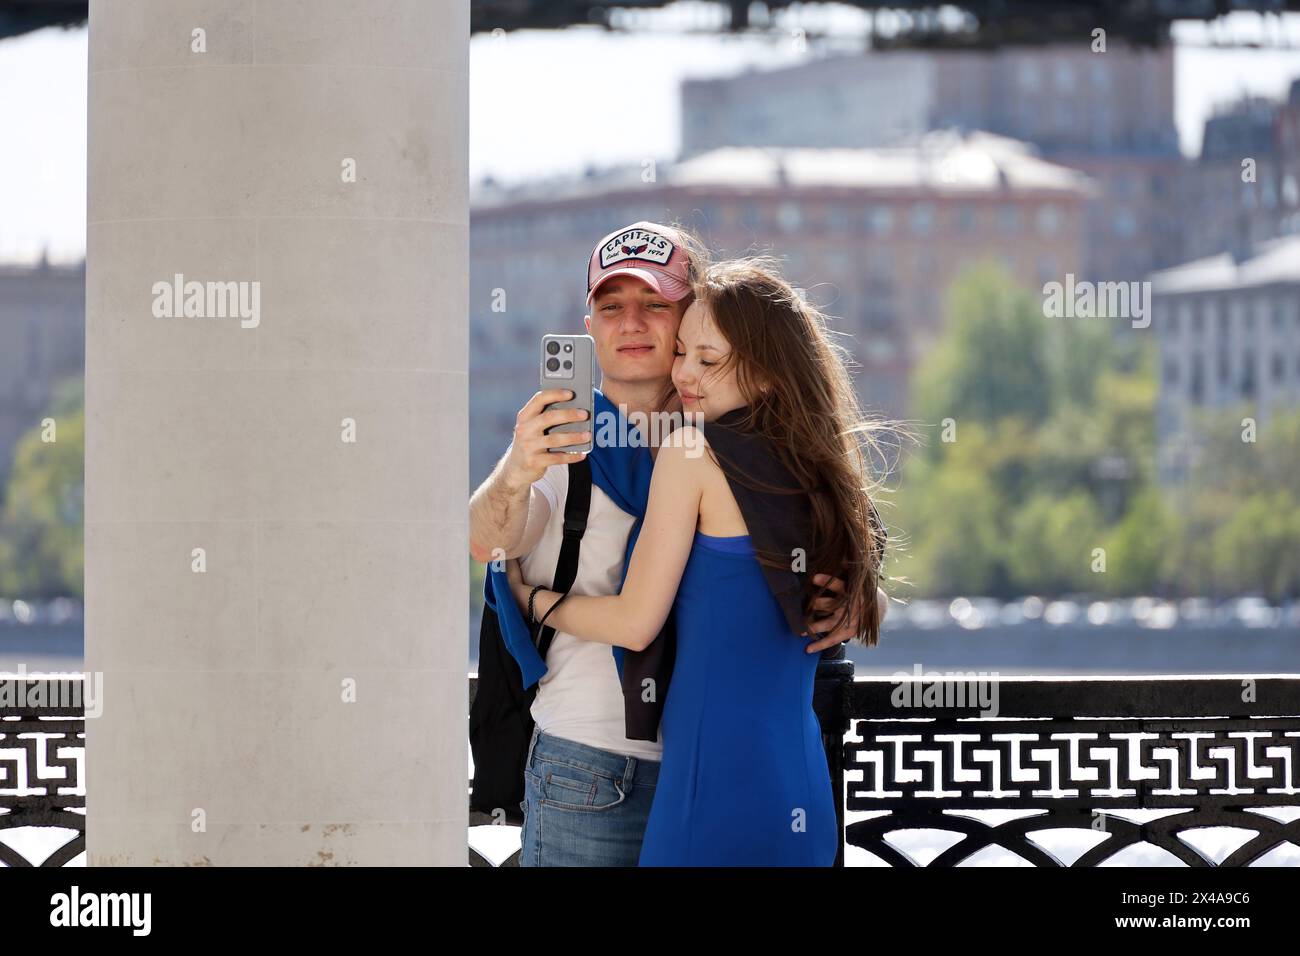 Young couple embracing and making selfie on a city embankment Stock Photo